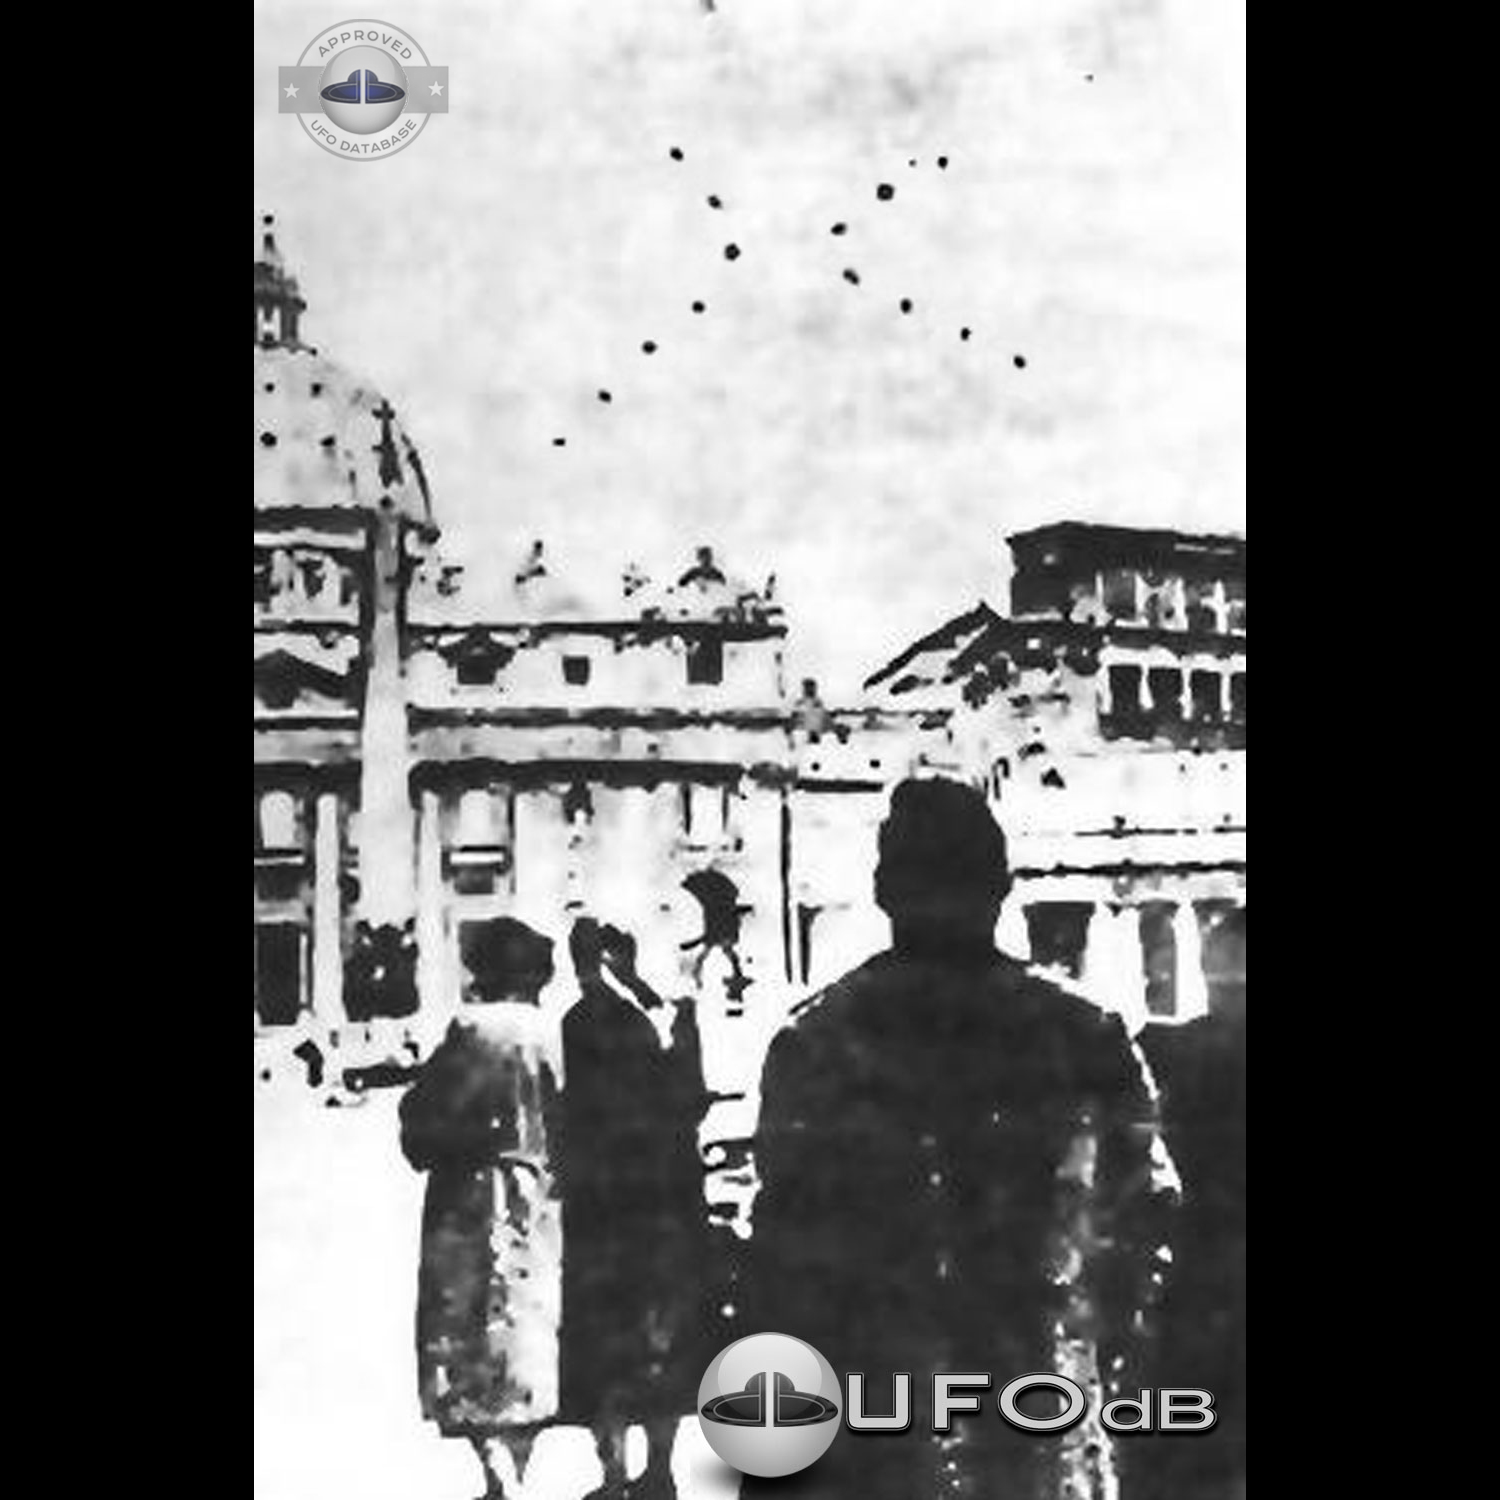 UFO picture showing people St Peter’s Square looking several UFO UFO Picture #104-1